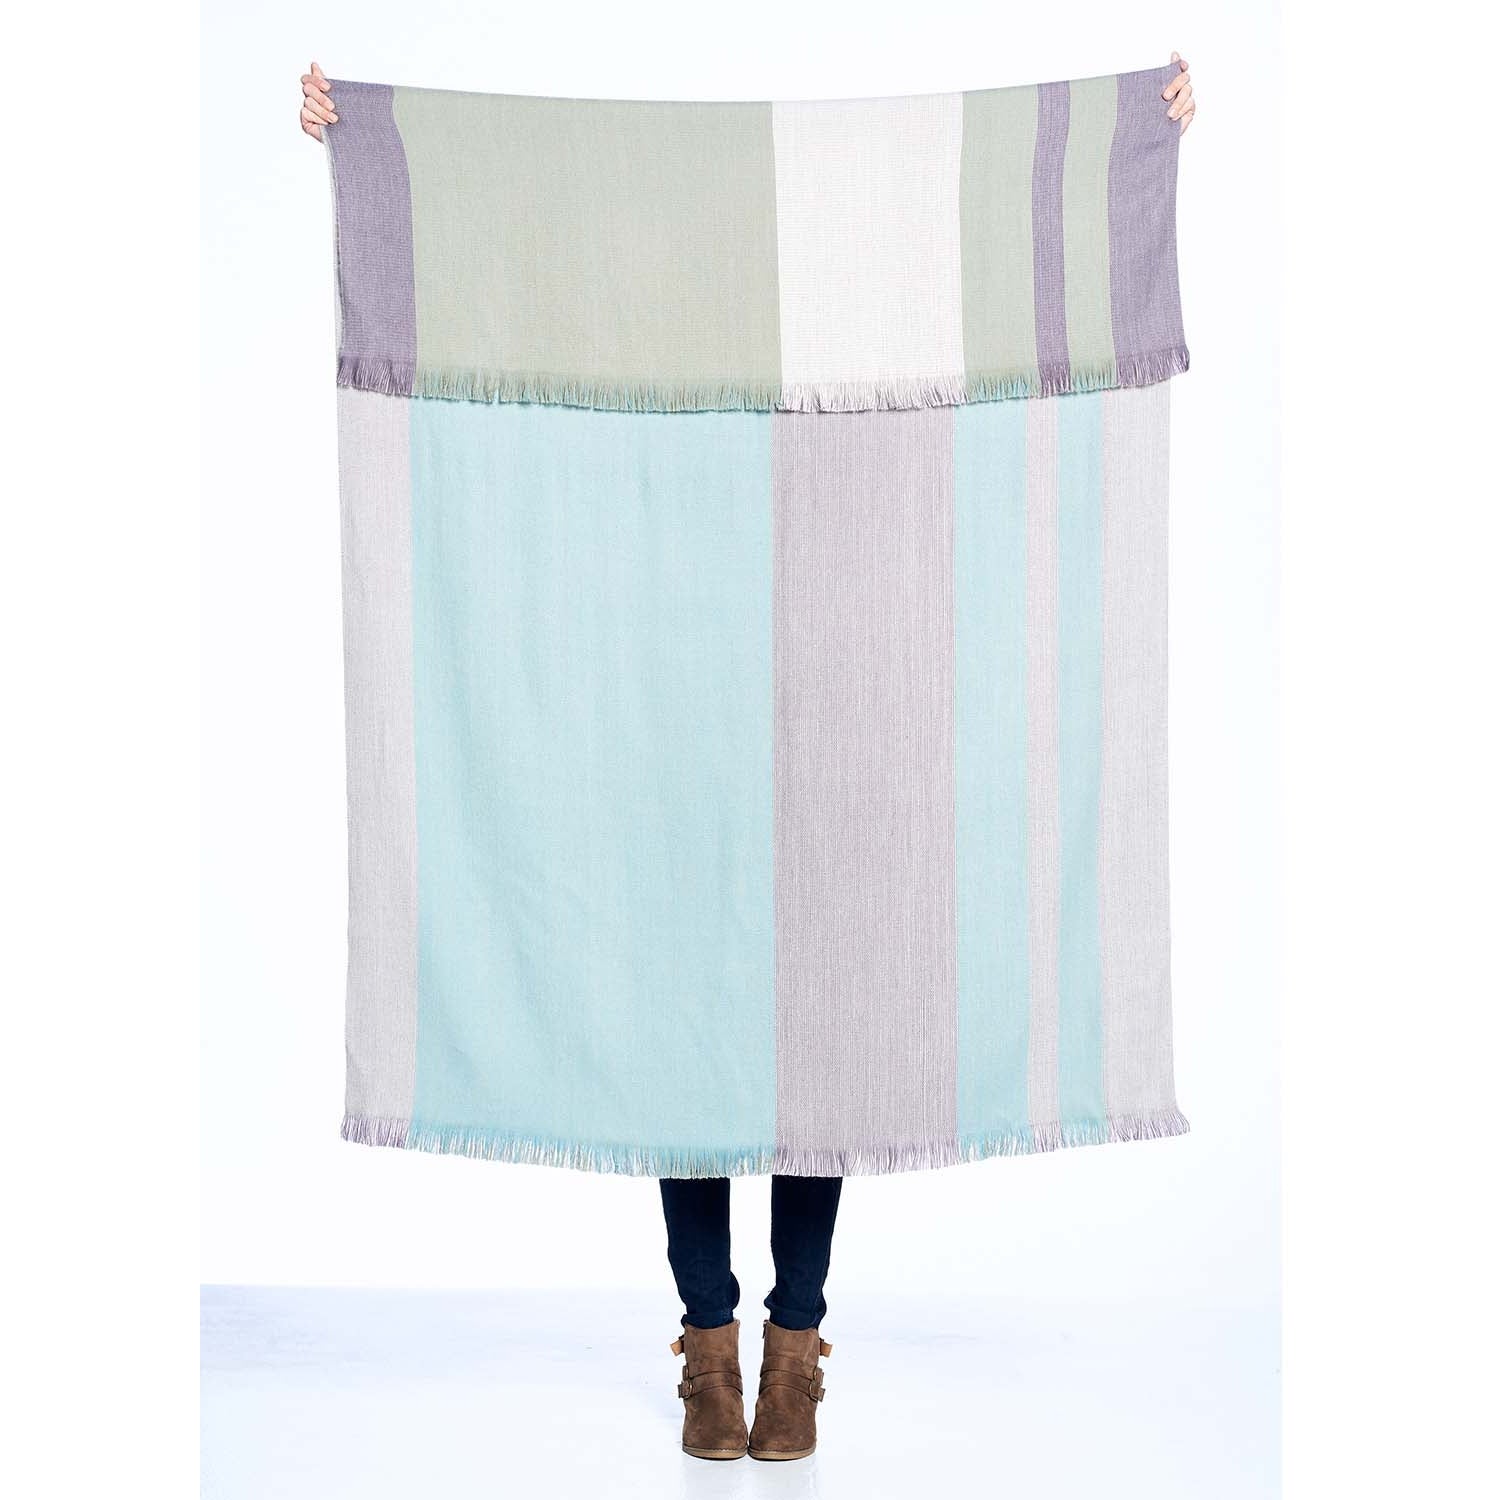 A person who cannot be seen holds up a large throw with a folded over top.  The photo is showing that the throw has colored block pattern on each side in pastel pinks, blues, and purples. 